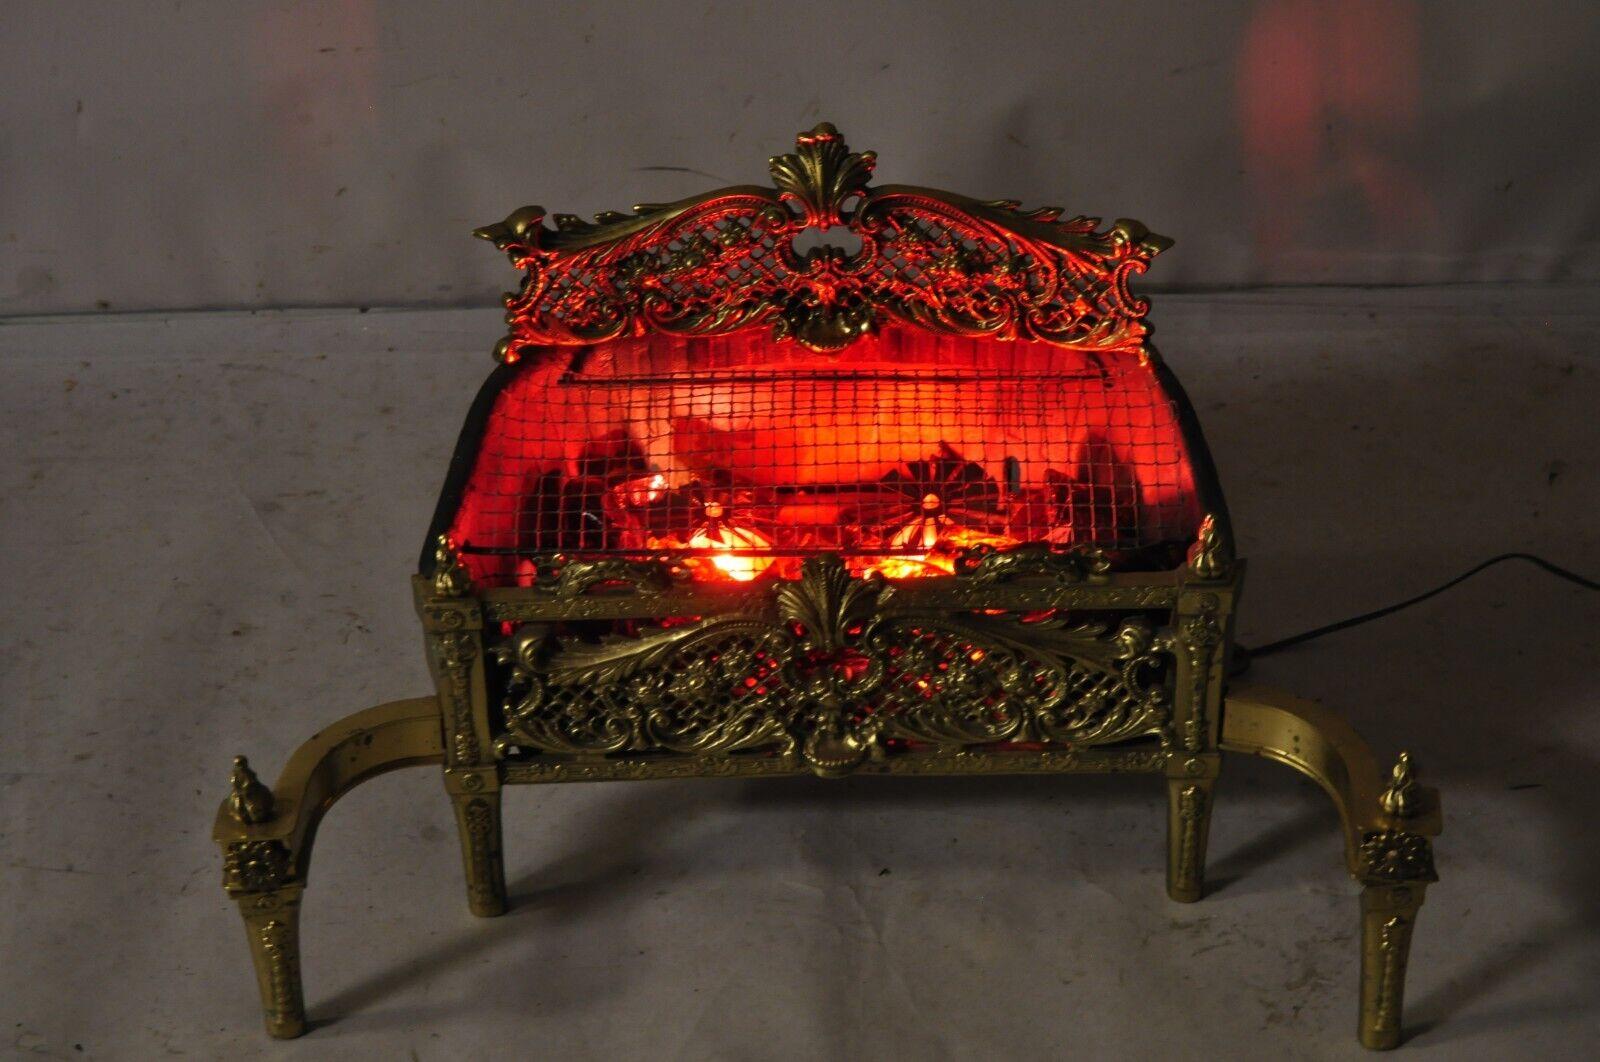 Antique French Victorian Style Ornate Brass Electric Light Glass Coal Fireplace Insert. Circa Early 20th Century. Measurements: 17